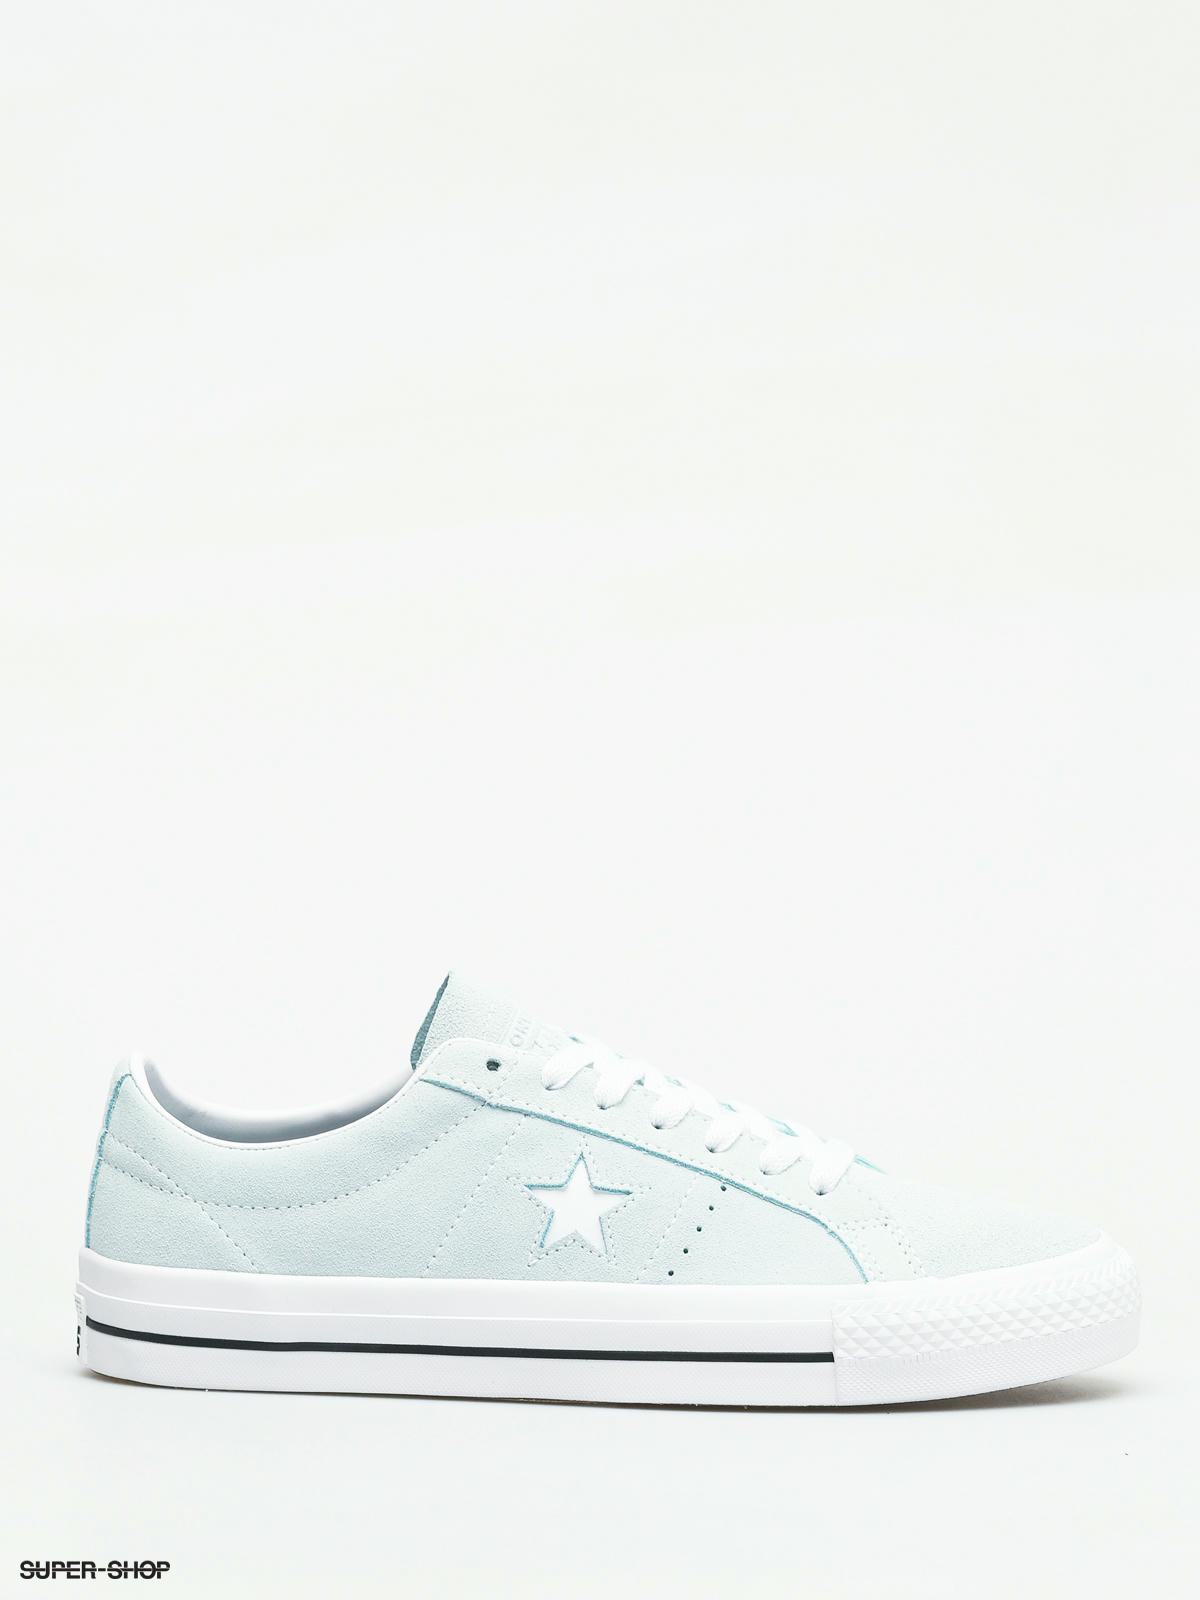 converse one star pro classic suede low top